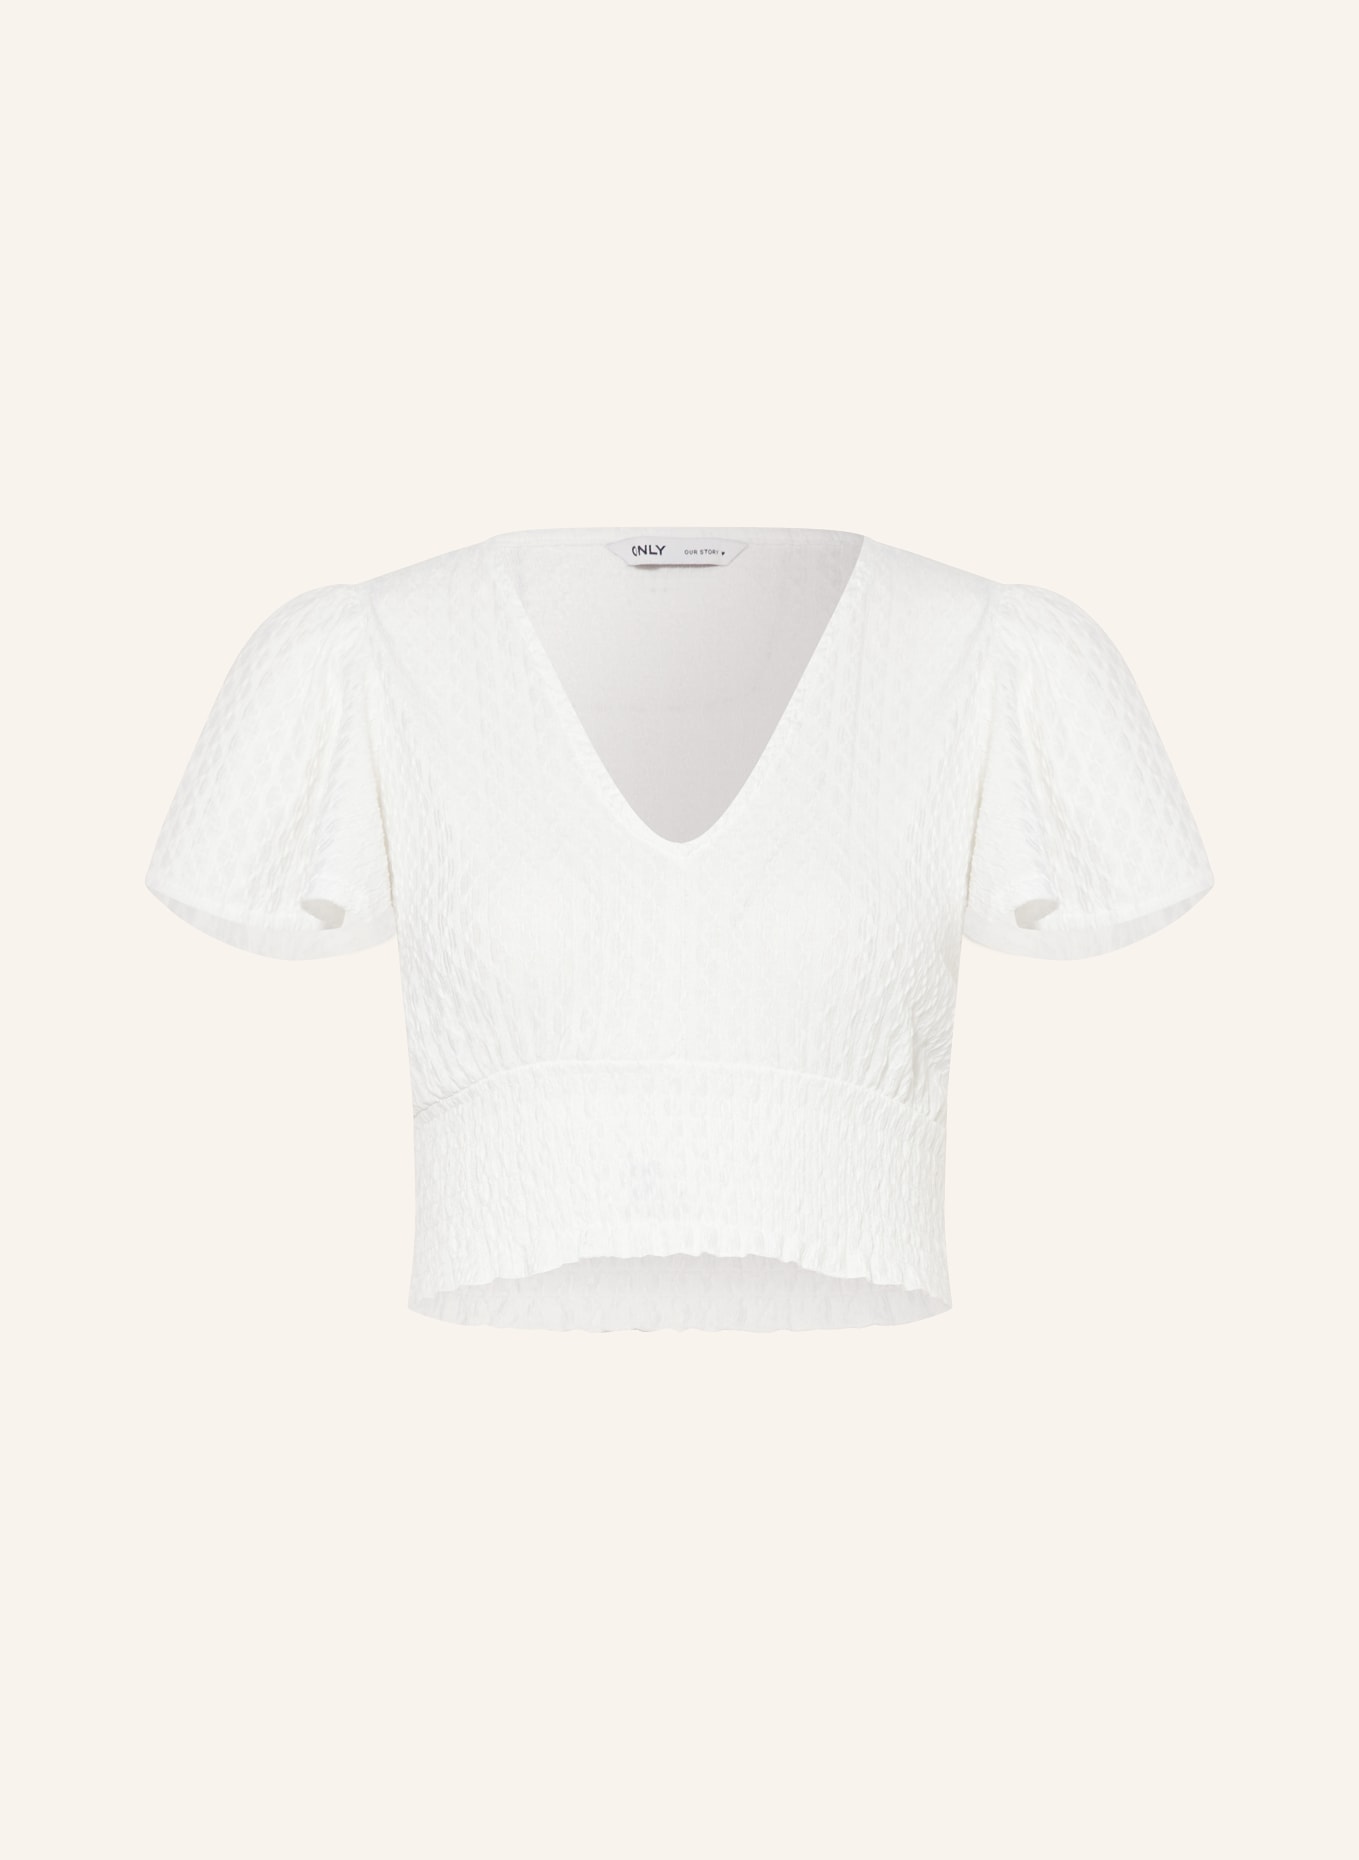 ONLY Cropped-Blusenshirt, Farbe: WEISS (Bild 1)